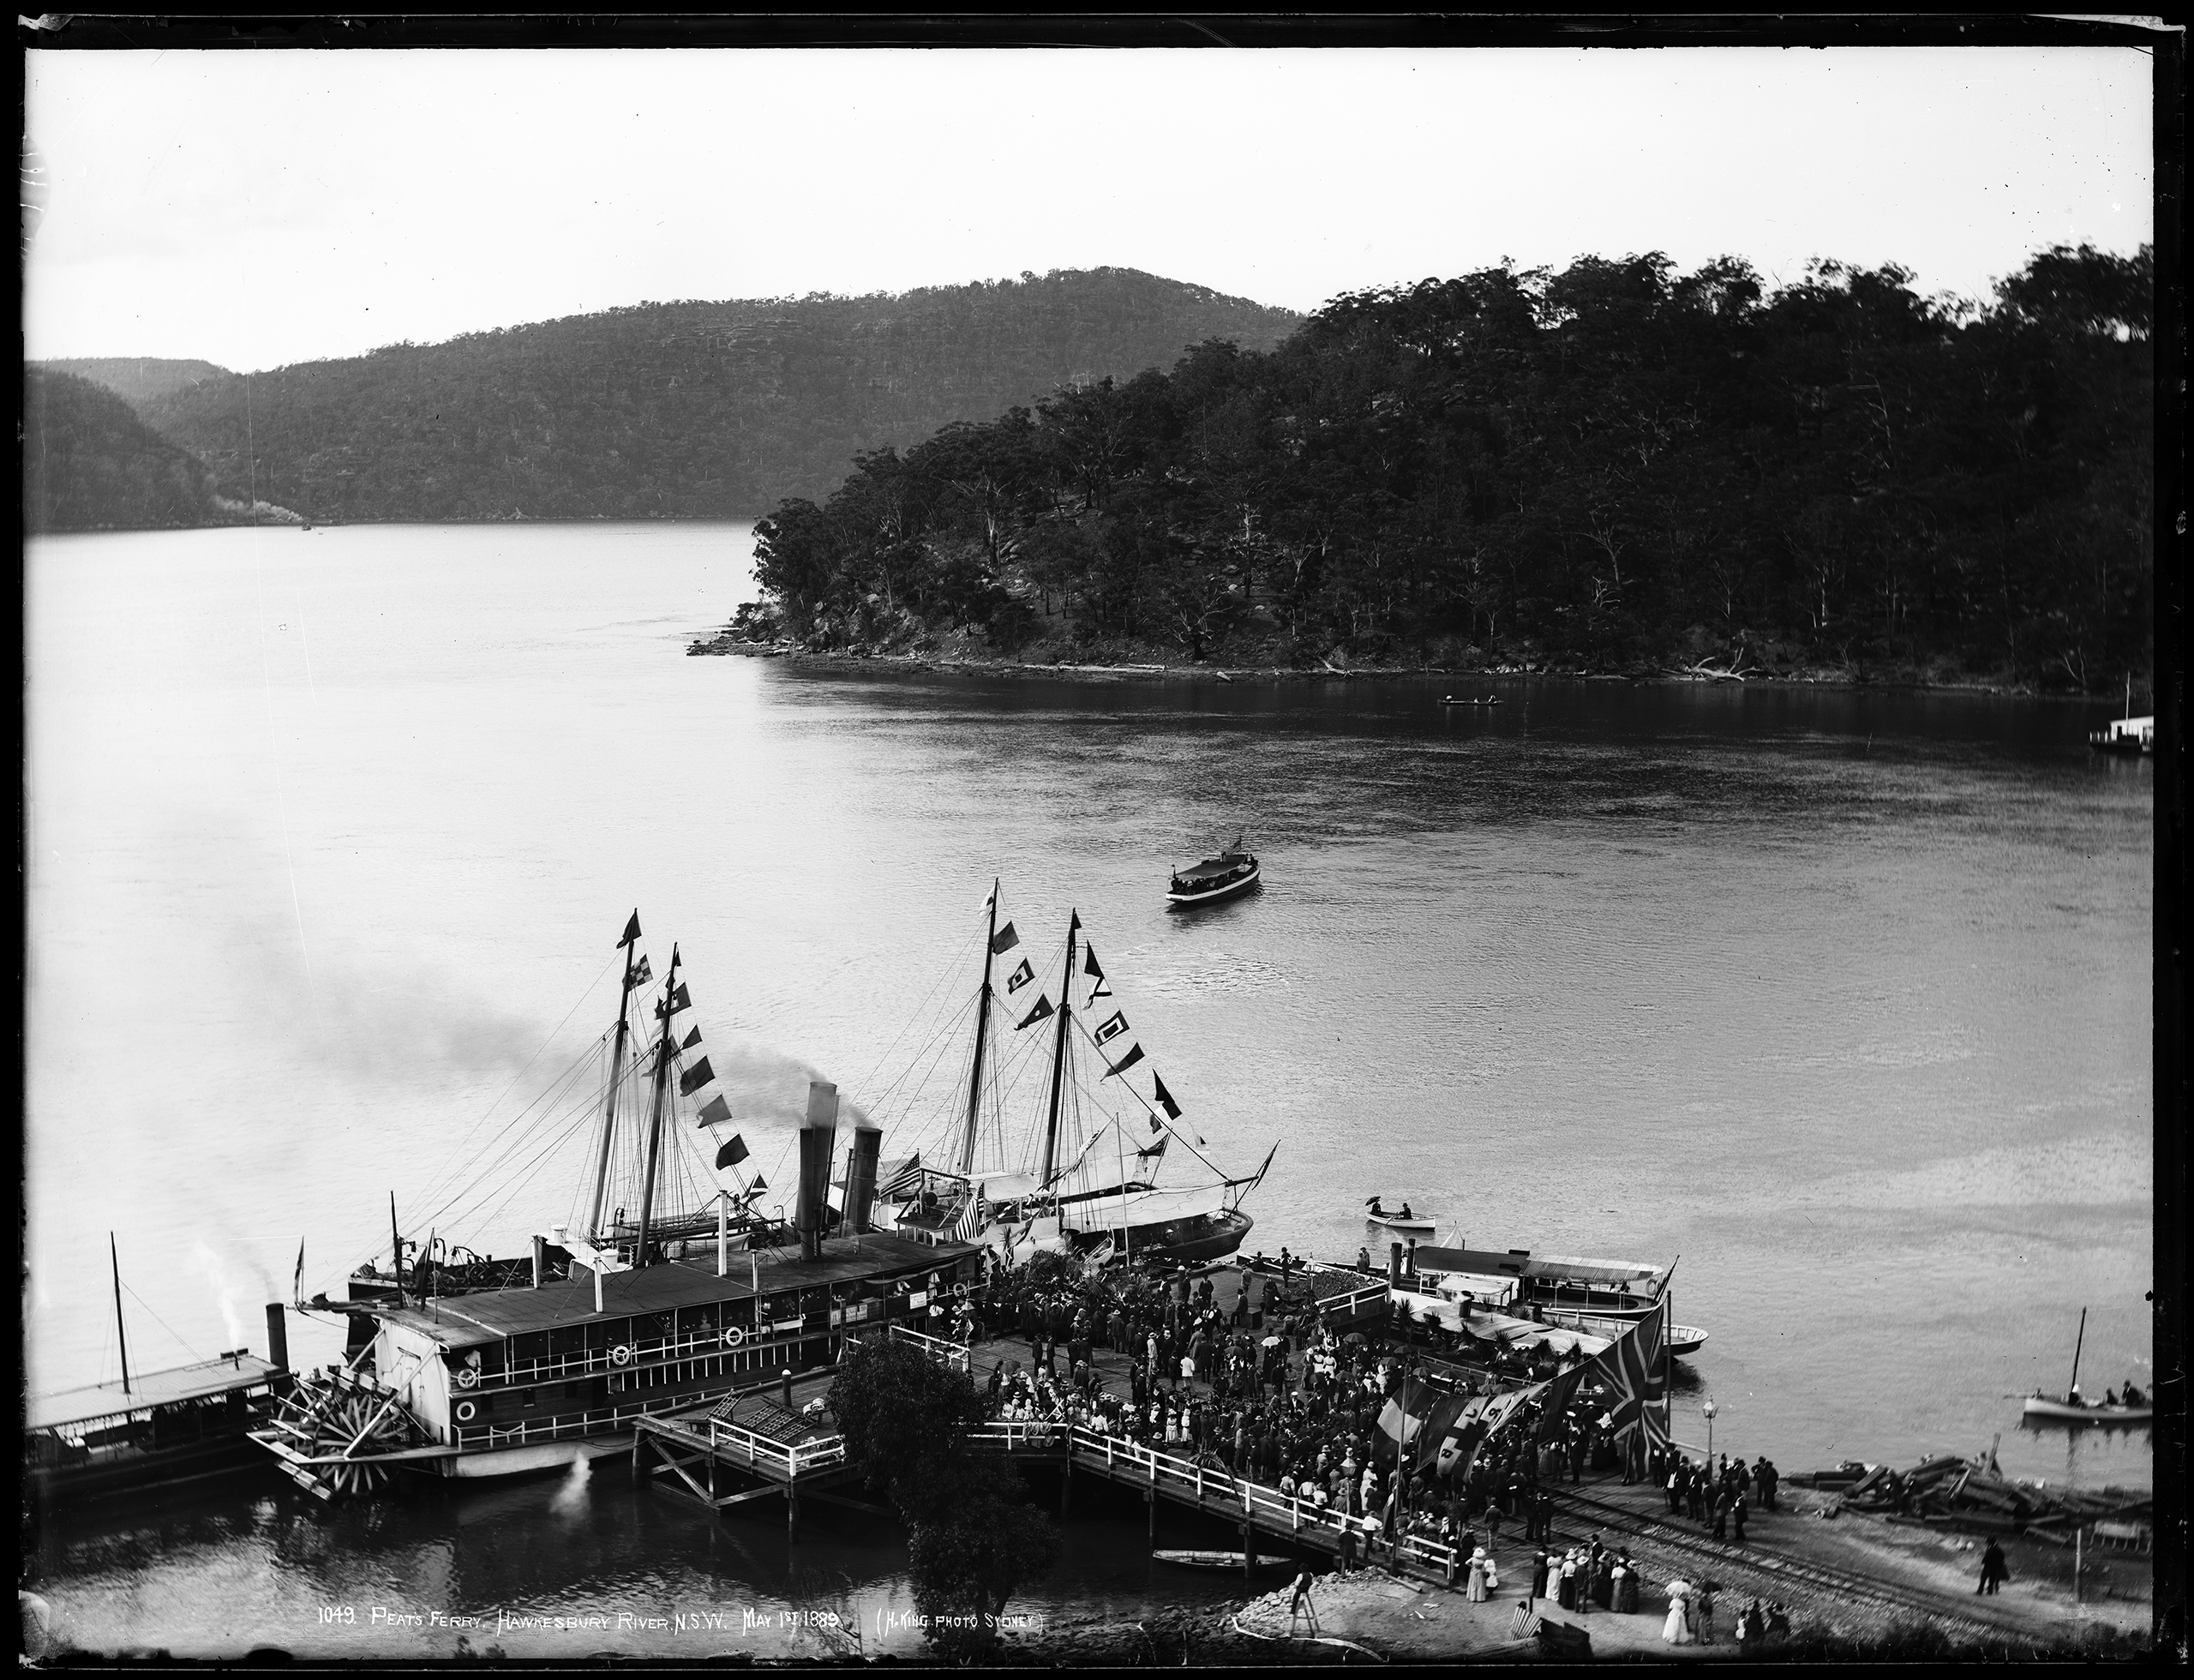 Paddle steamer 'General Gordon' on Hawkesbury River, NSW, during opening of the Hawkesbury River railway bridge, 1889